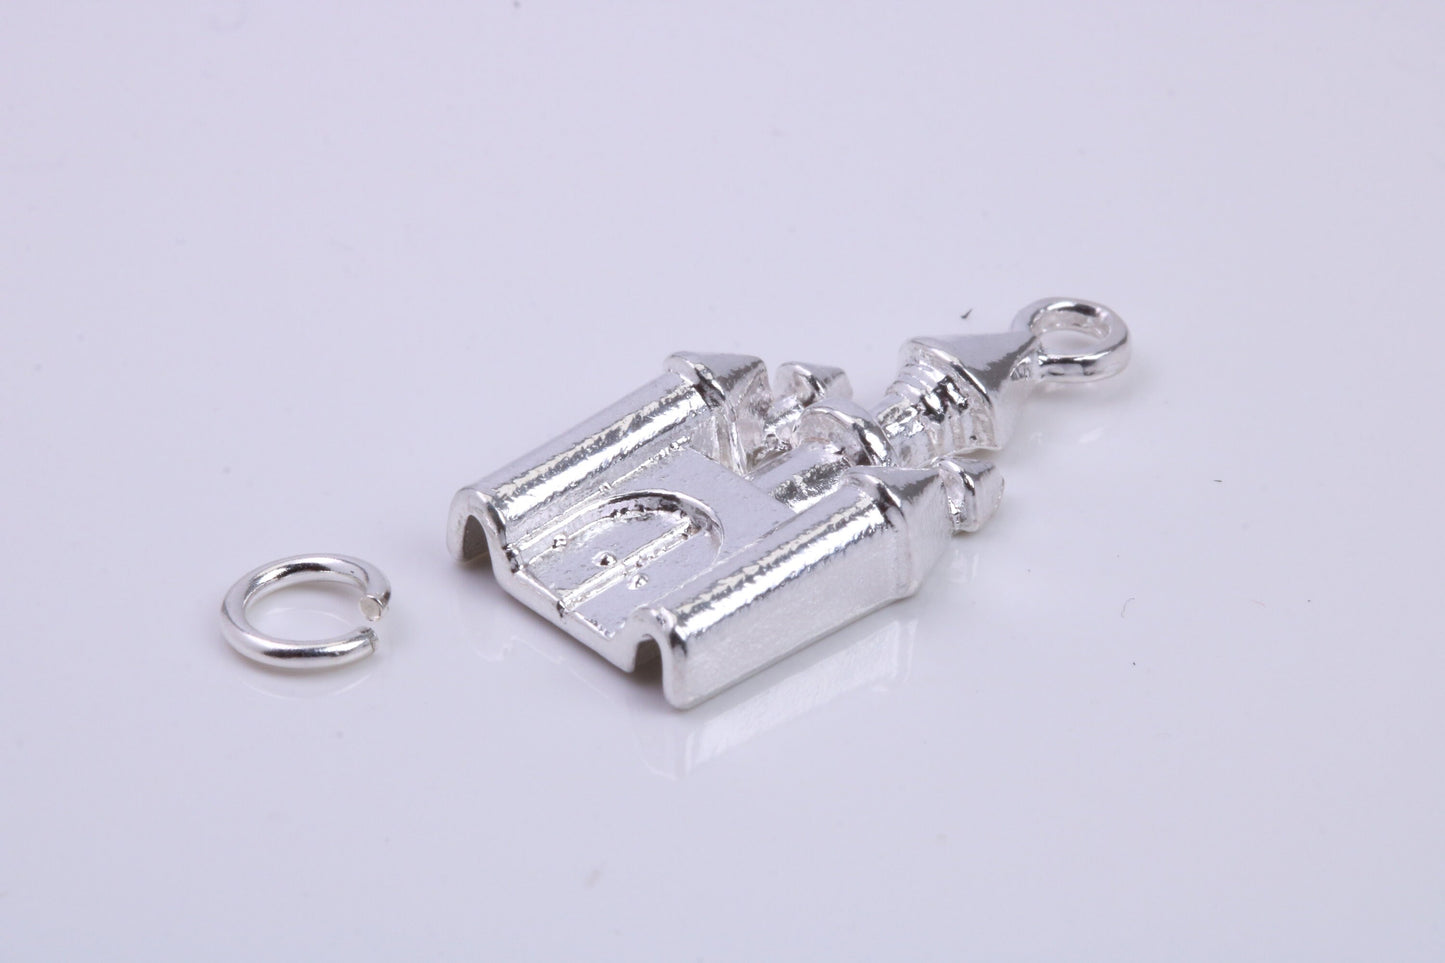 Princess Castle Charm, Traditional Charm, Made from Solid 925 Grade Sterling Silver, Complete with Attachment Link